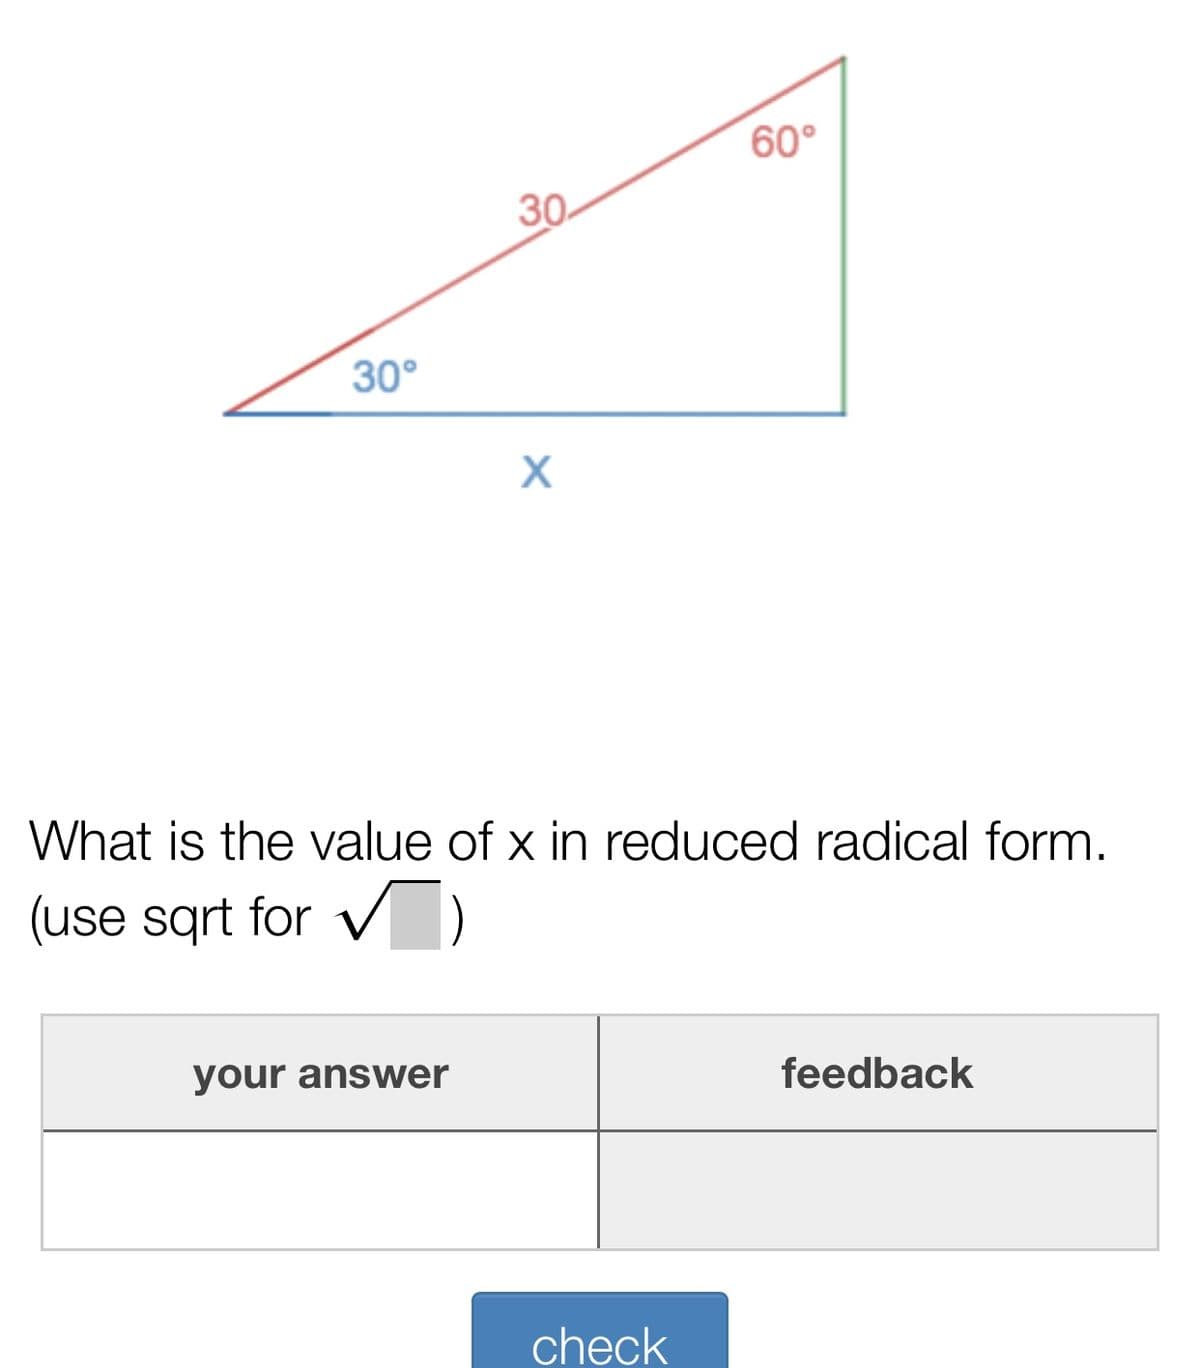 60°
30
30°
What is the value of x in reduced radical form.
(use sqrt for v D
your answer
feedback
check
